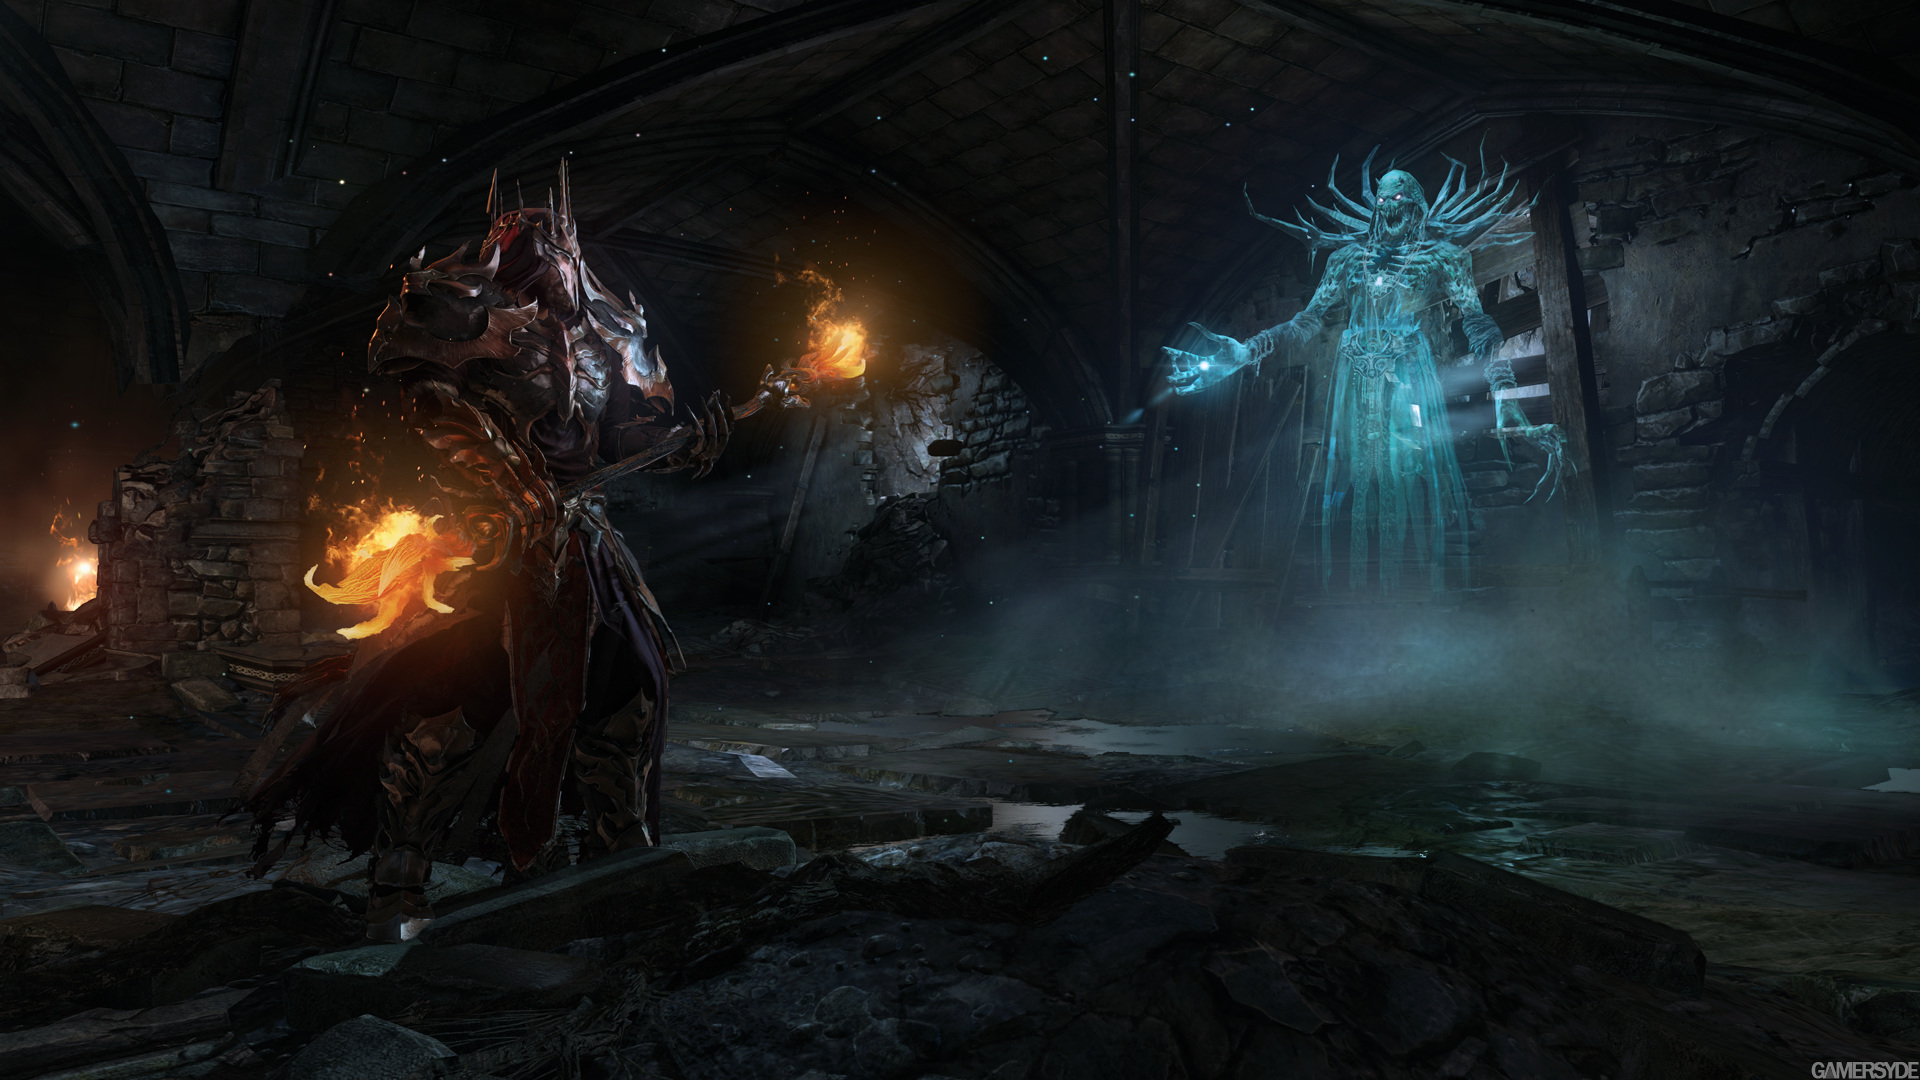 for mac download Lords of the Fallen